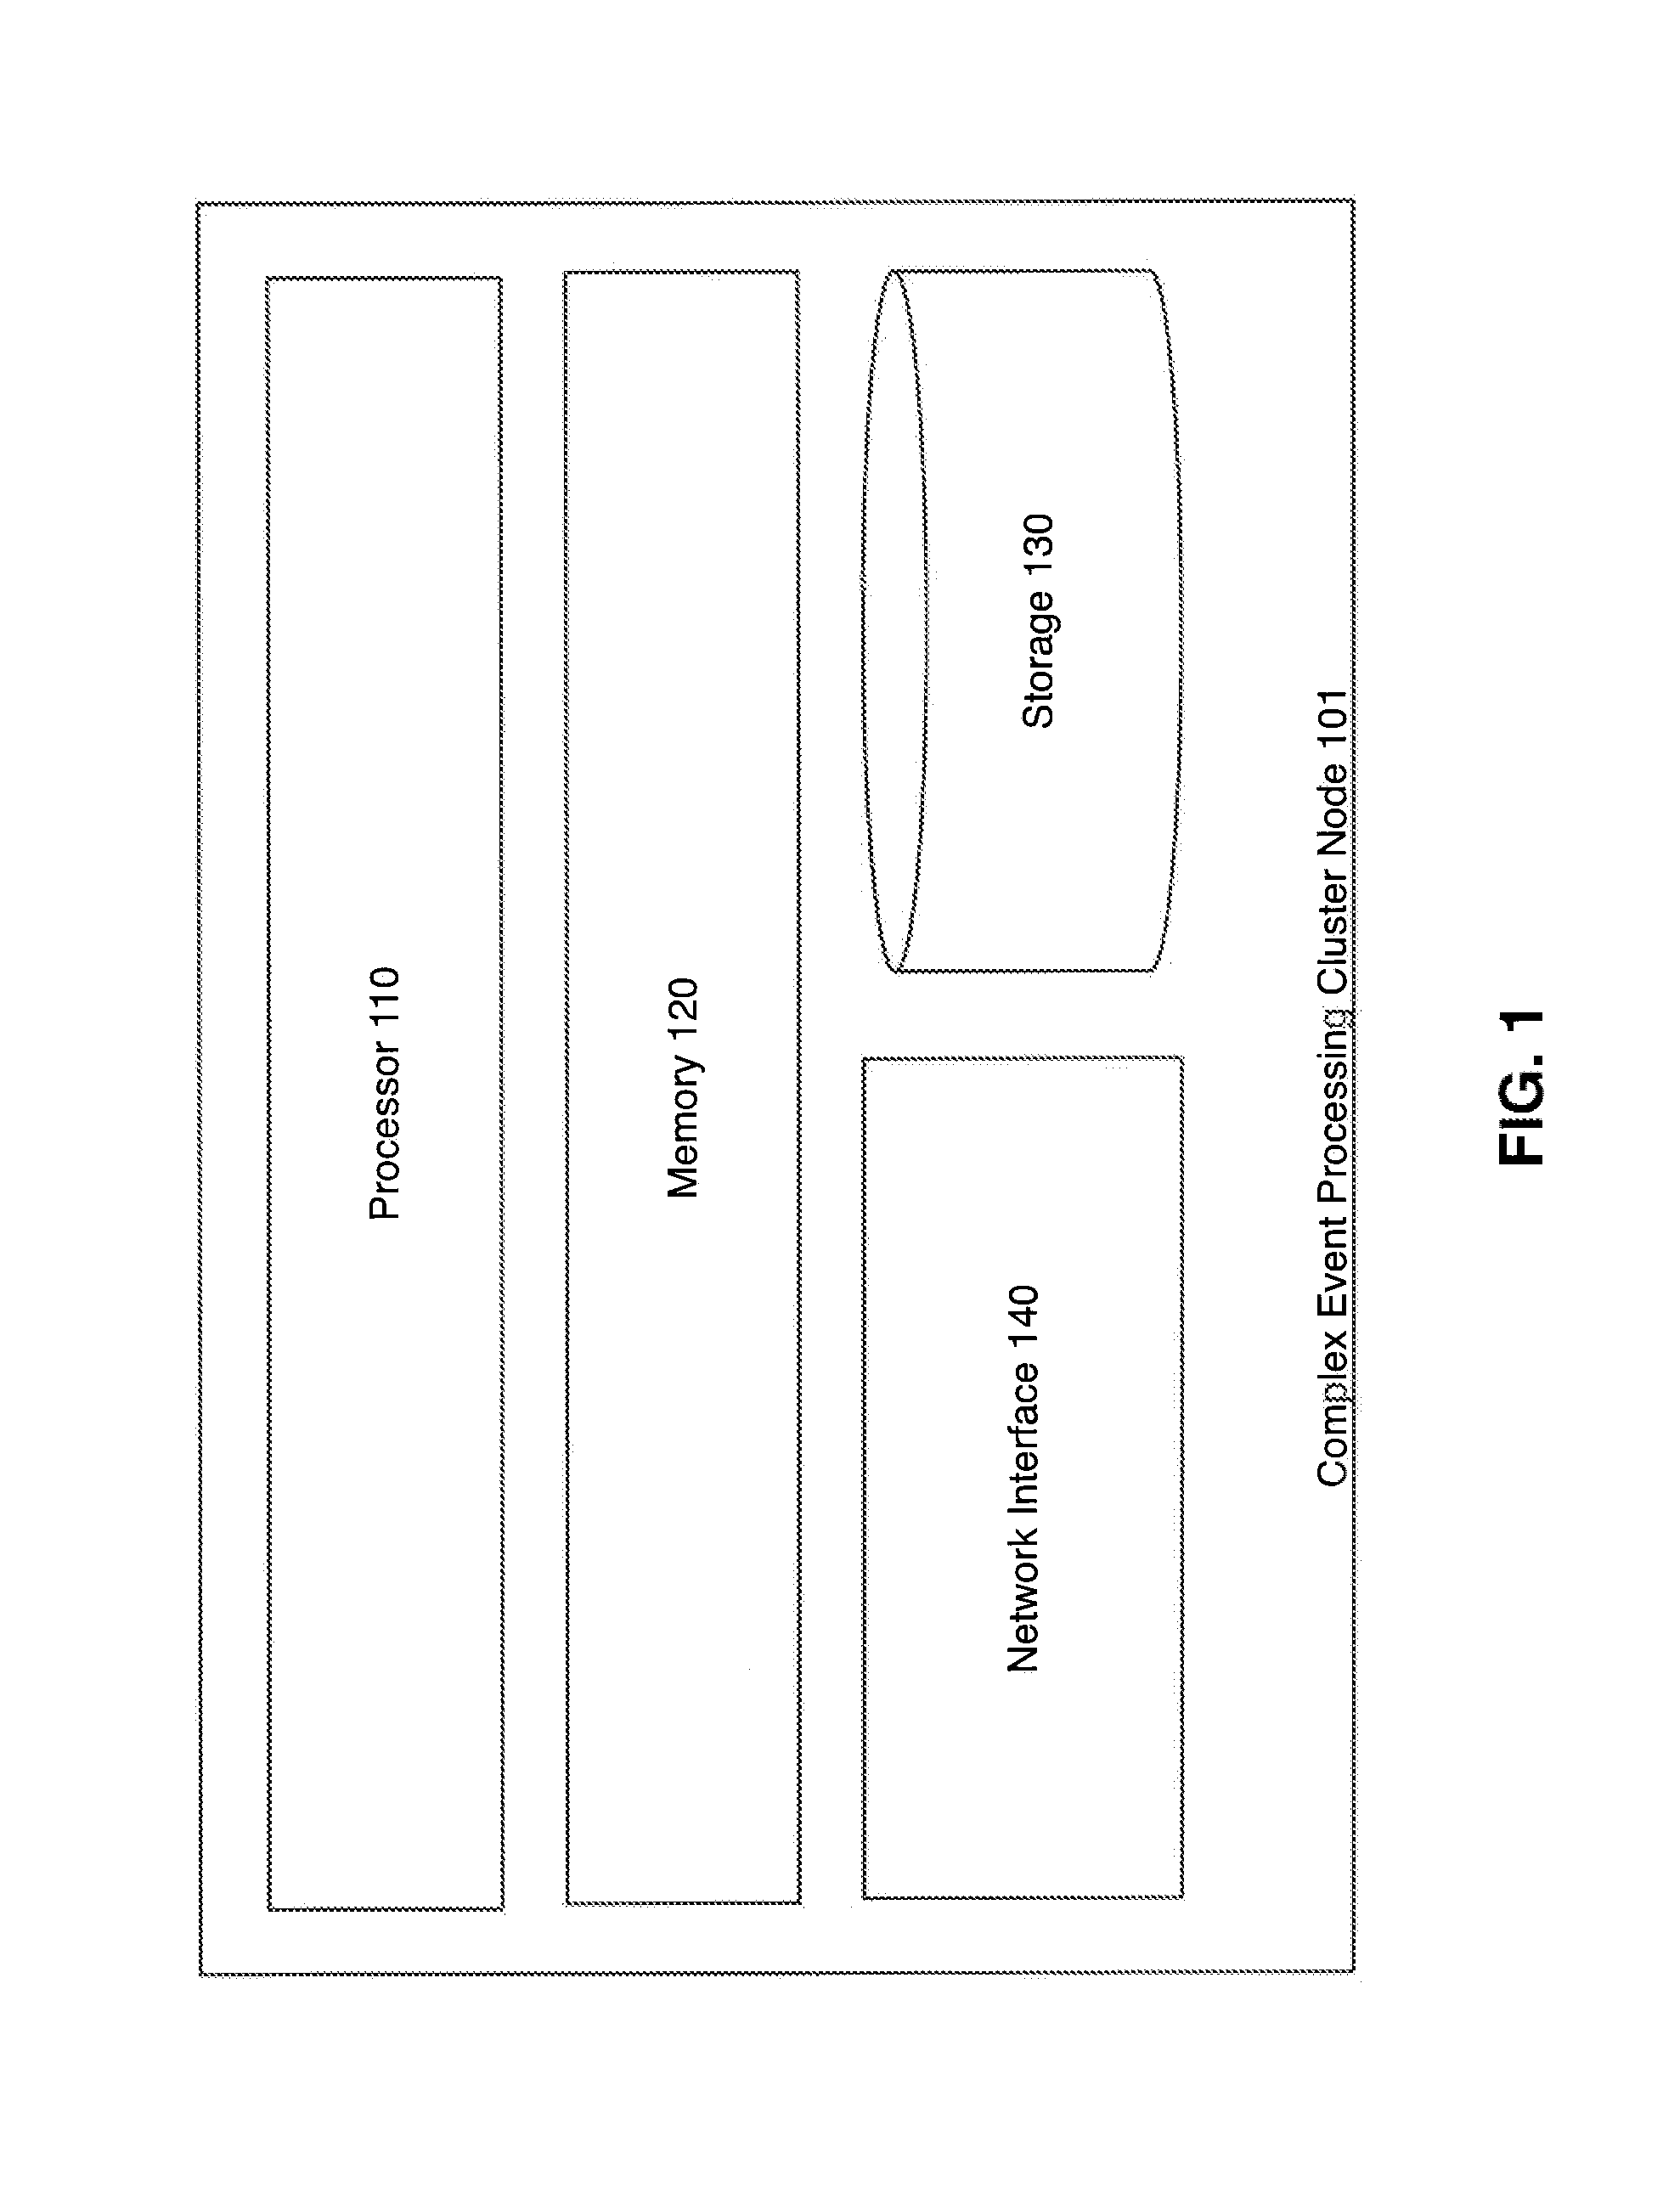 Dynamic Load Balancing for Complex Event Processing